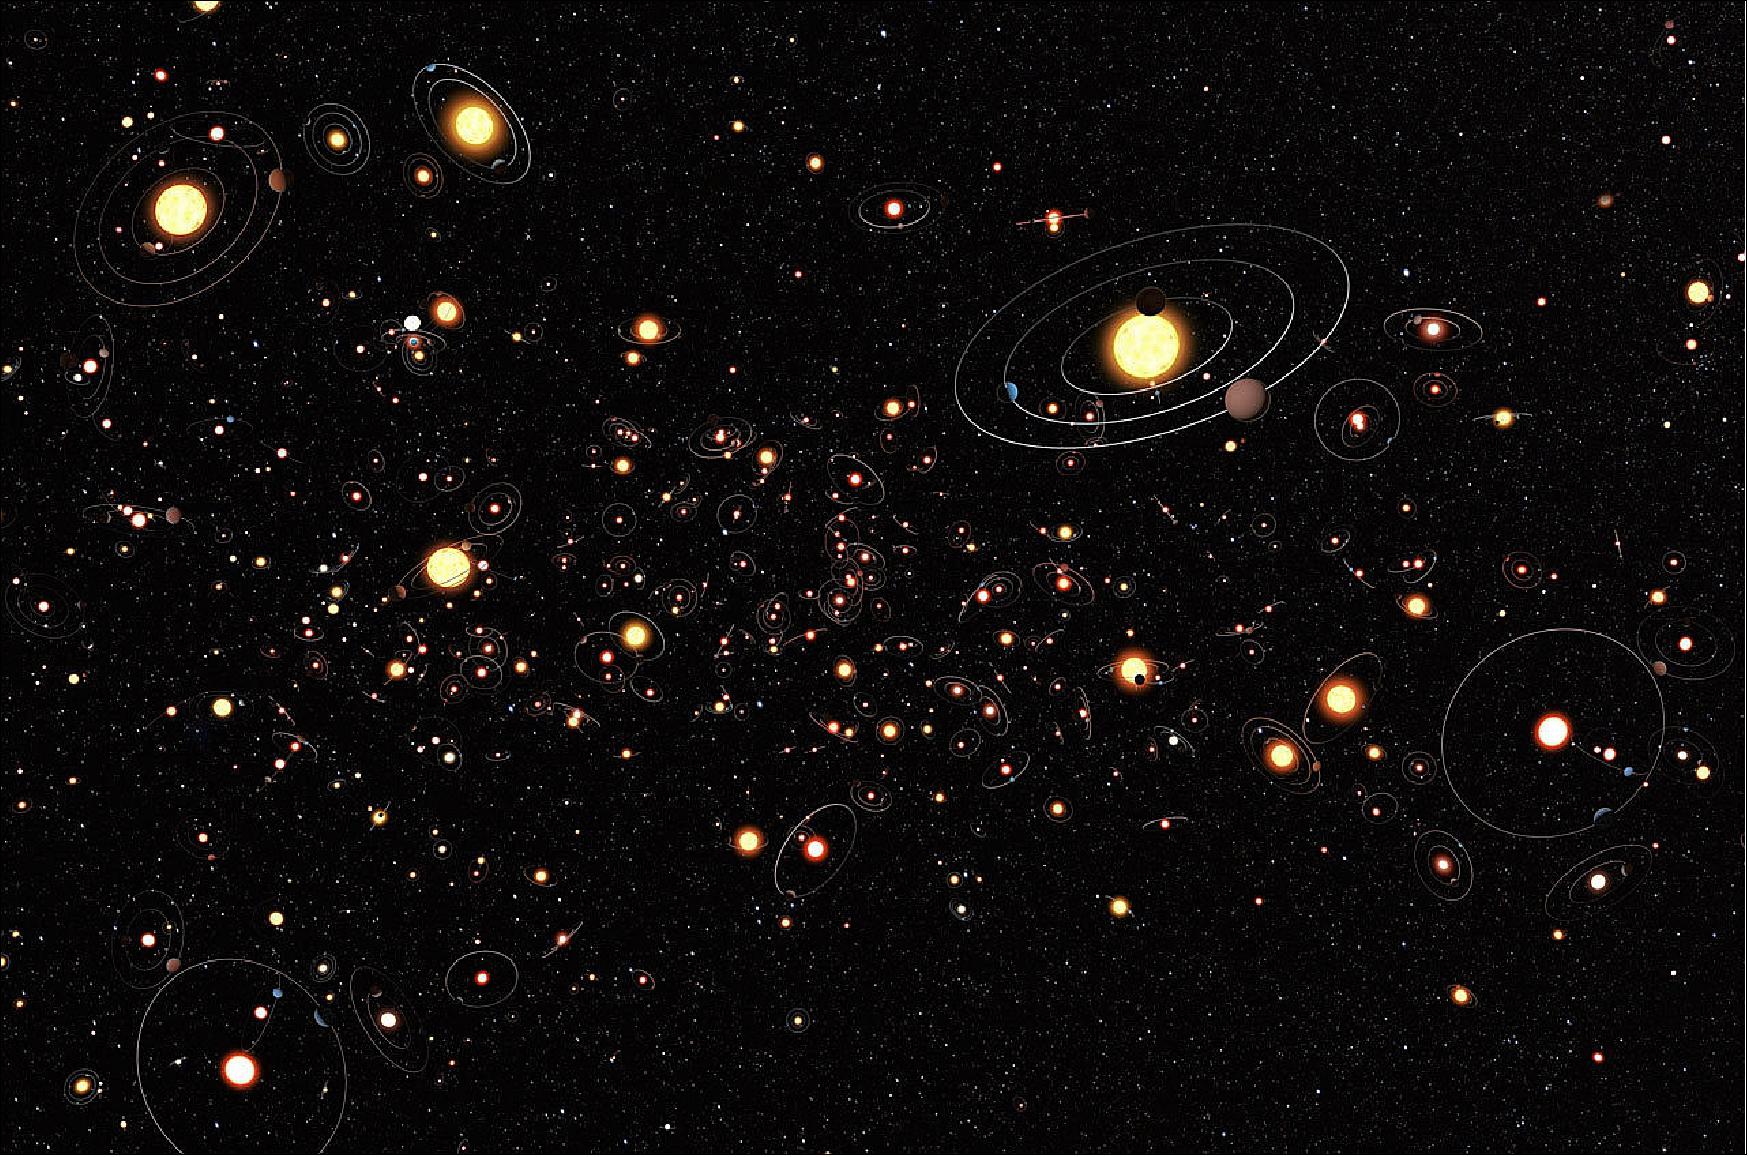 Figure 34: After detecting the first exoplanets in the 1990s it has become clear that planets around other stars are the rule rather than the exception and there are likely hundreds of billions of exoplanets in the Milky Way alone. The search for these planets is now a large field of astronomy (image credit: ESA/Hubble/ESO/M. Kornmesser)